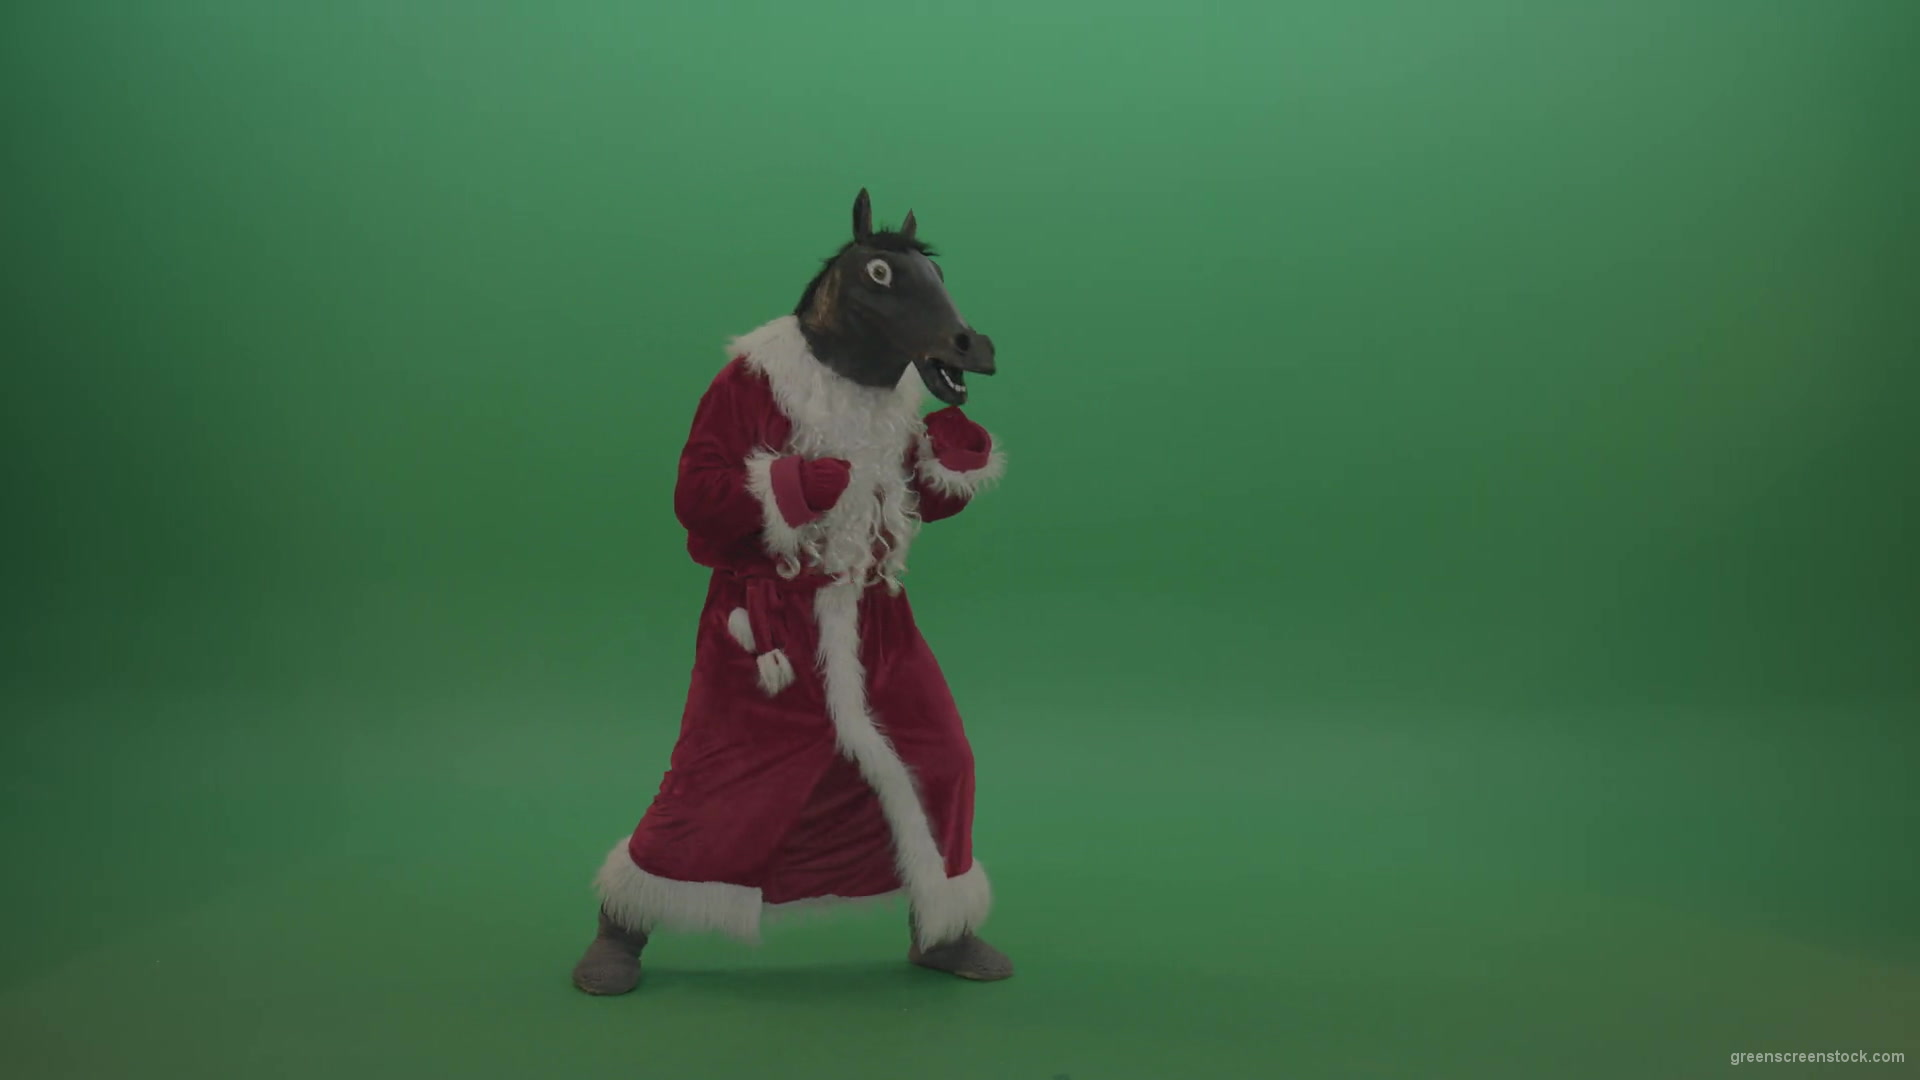 Horse-head-santa-displays-his-fight-techniques-over-chromakey-background-1920_006 Green Screen Stock